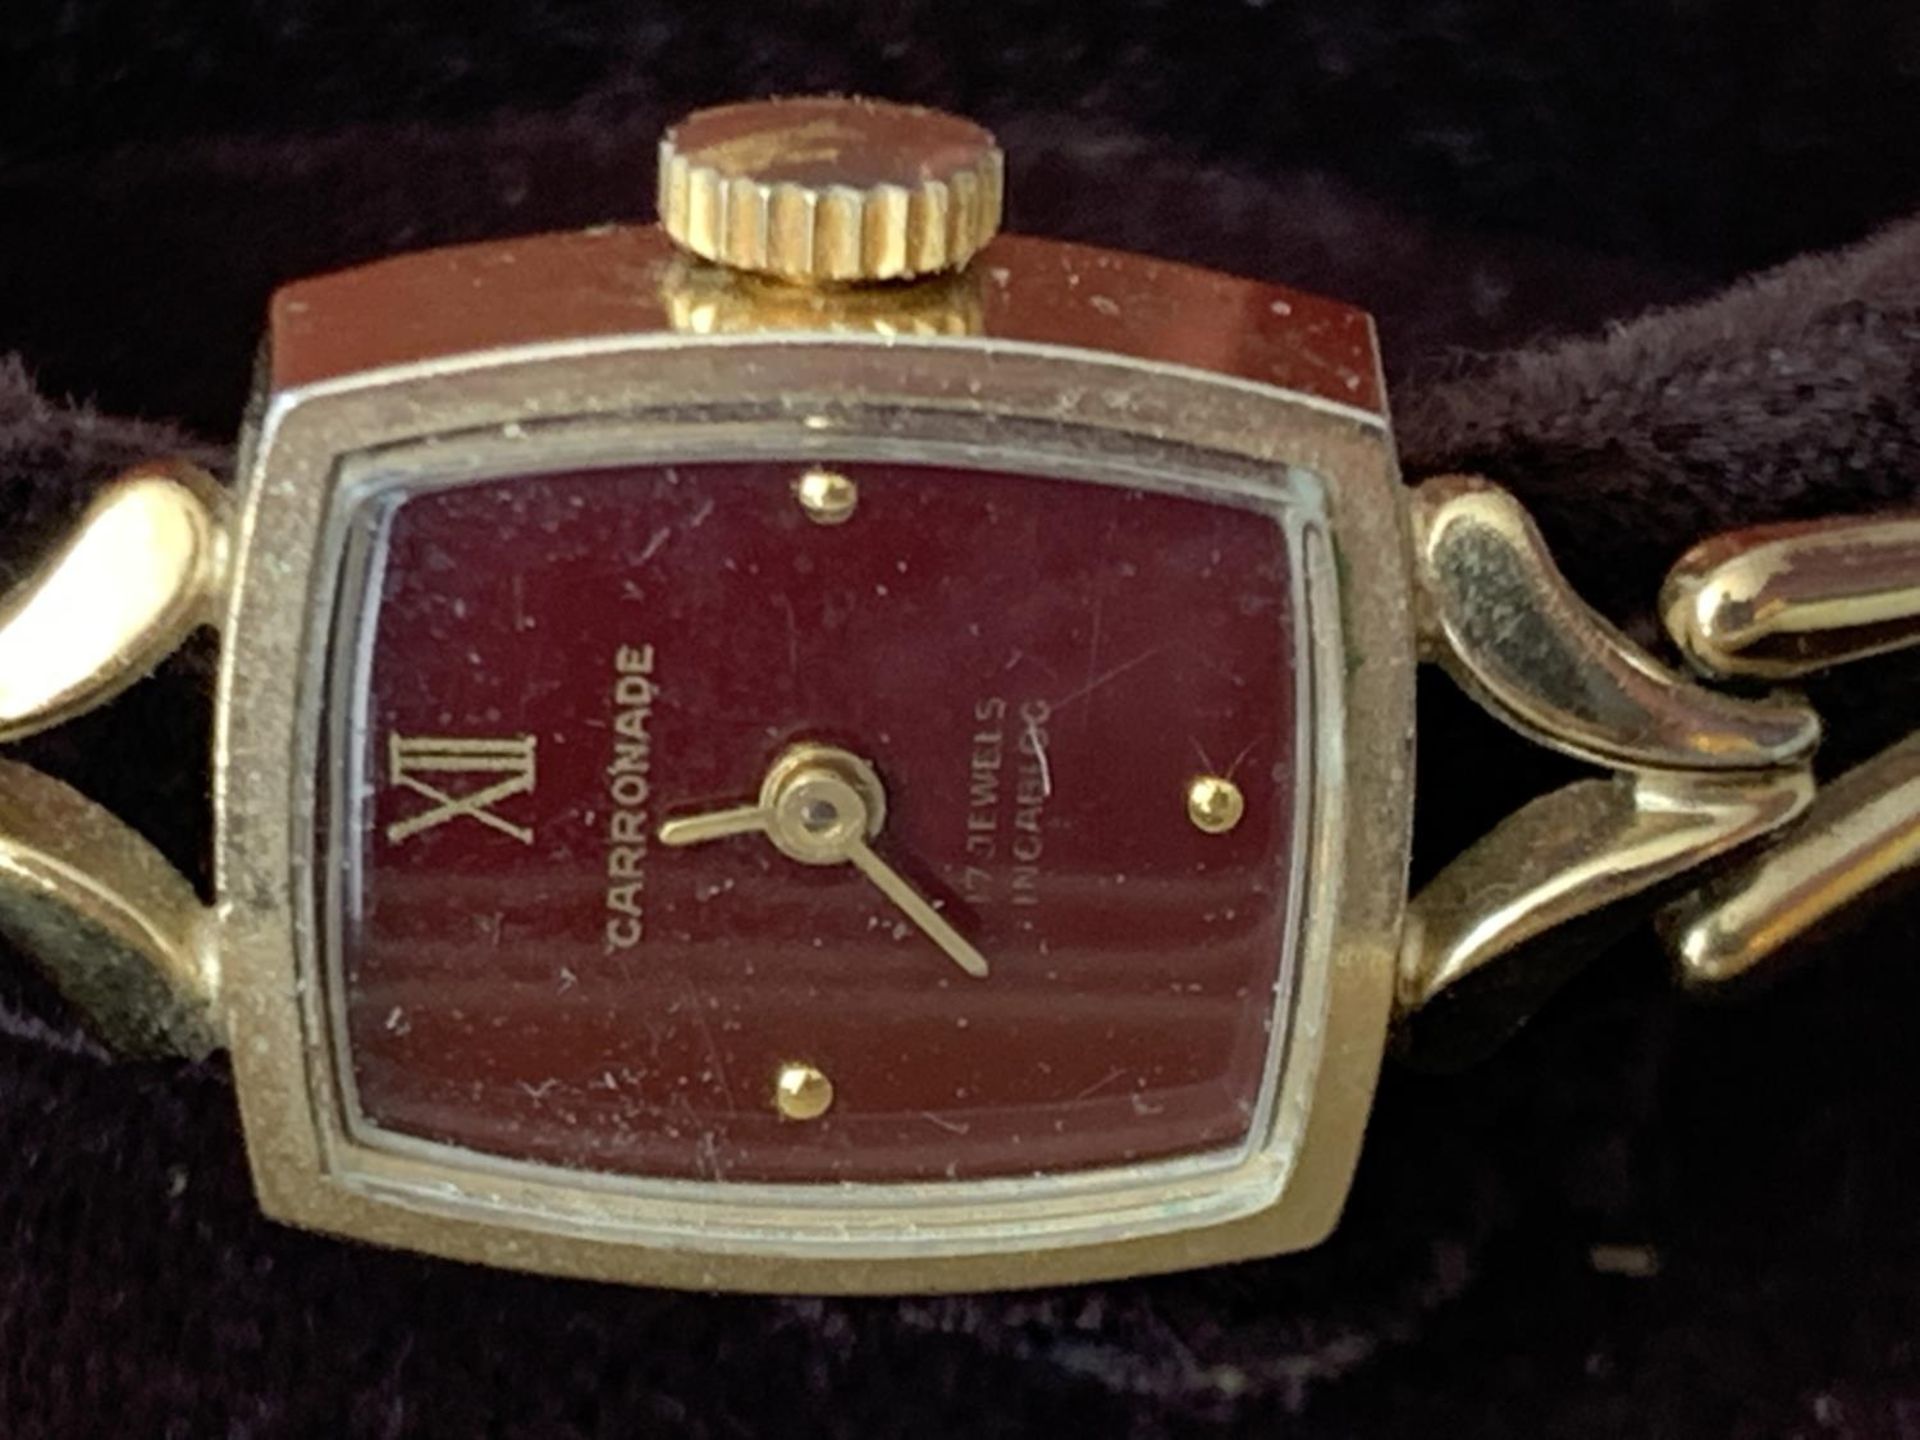 A LADIES CARRONADE WRISTWATCH IN A PRESENTATION BOX SEEN WORKING BUT NO WARRANTY - Image 2 of 4